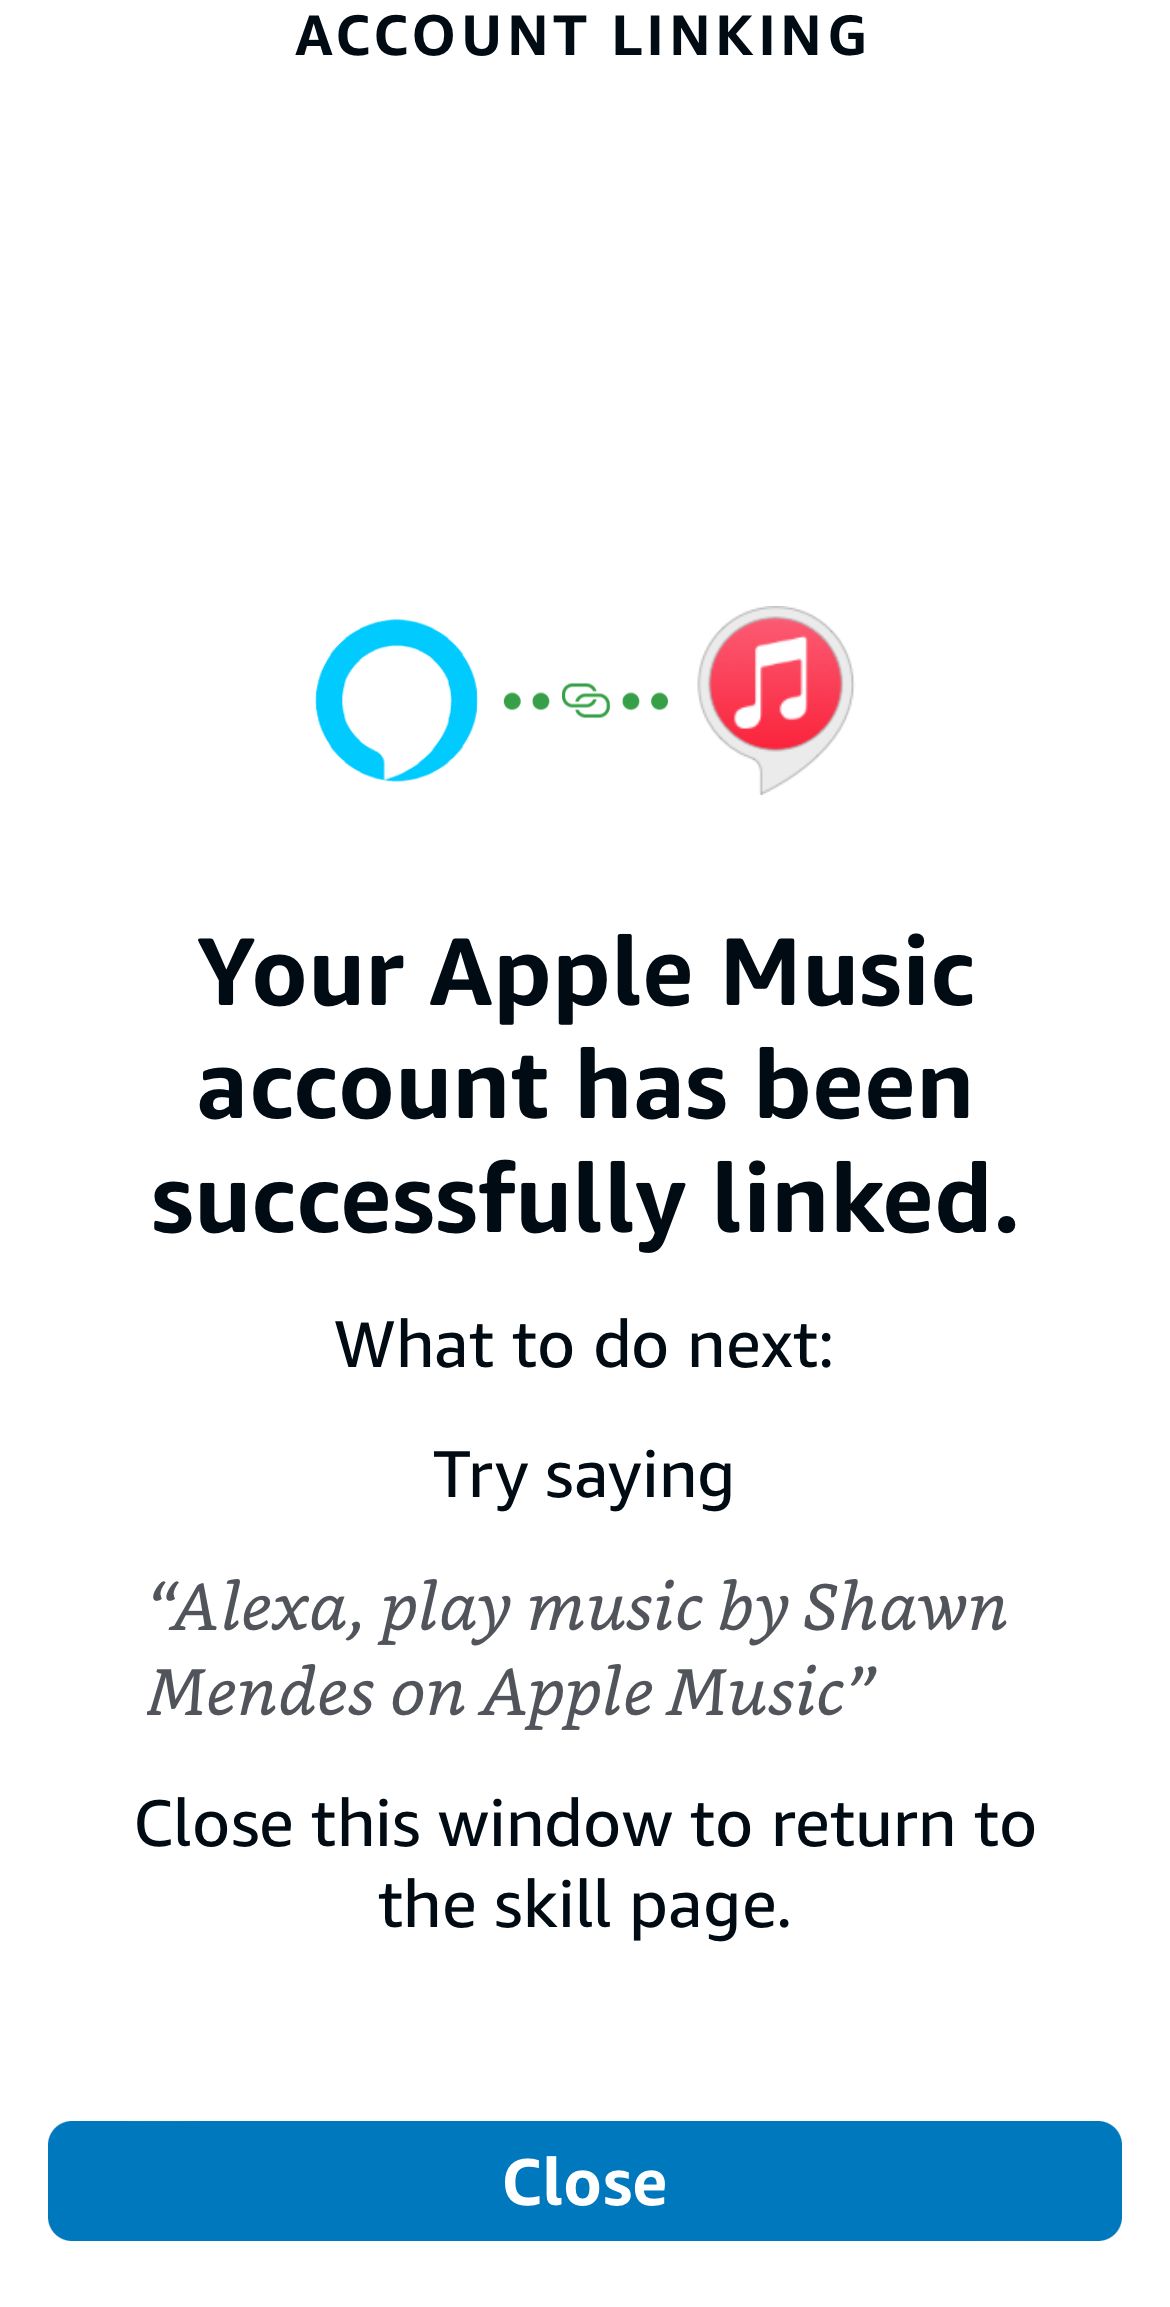 Alexa app indicating Apple Music has been successfully linked to account.